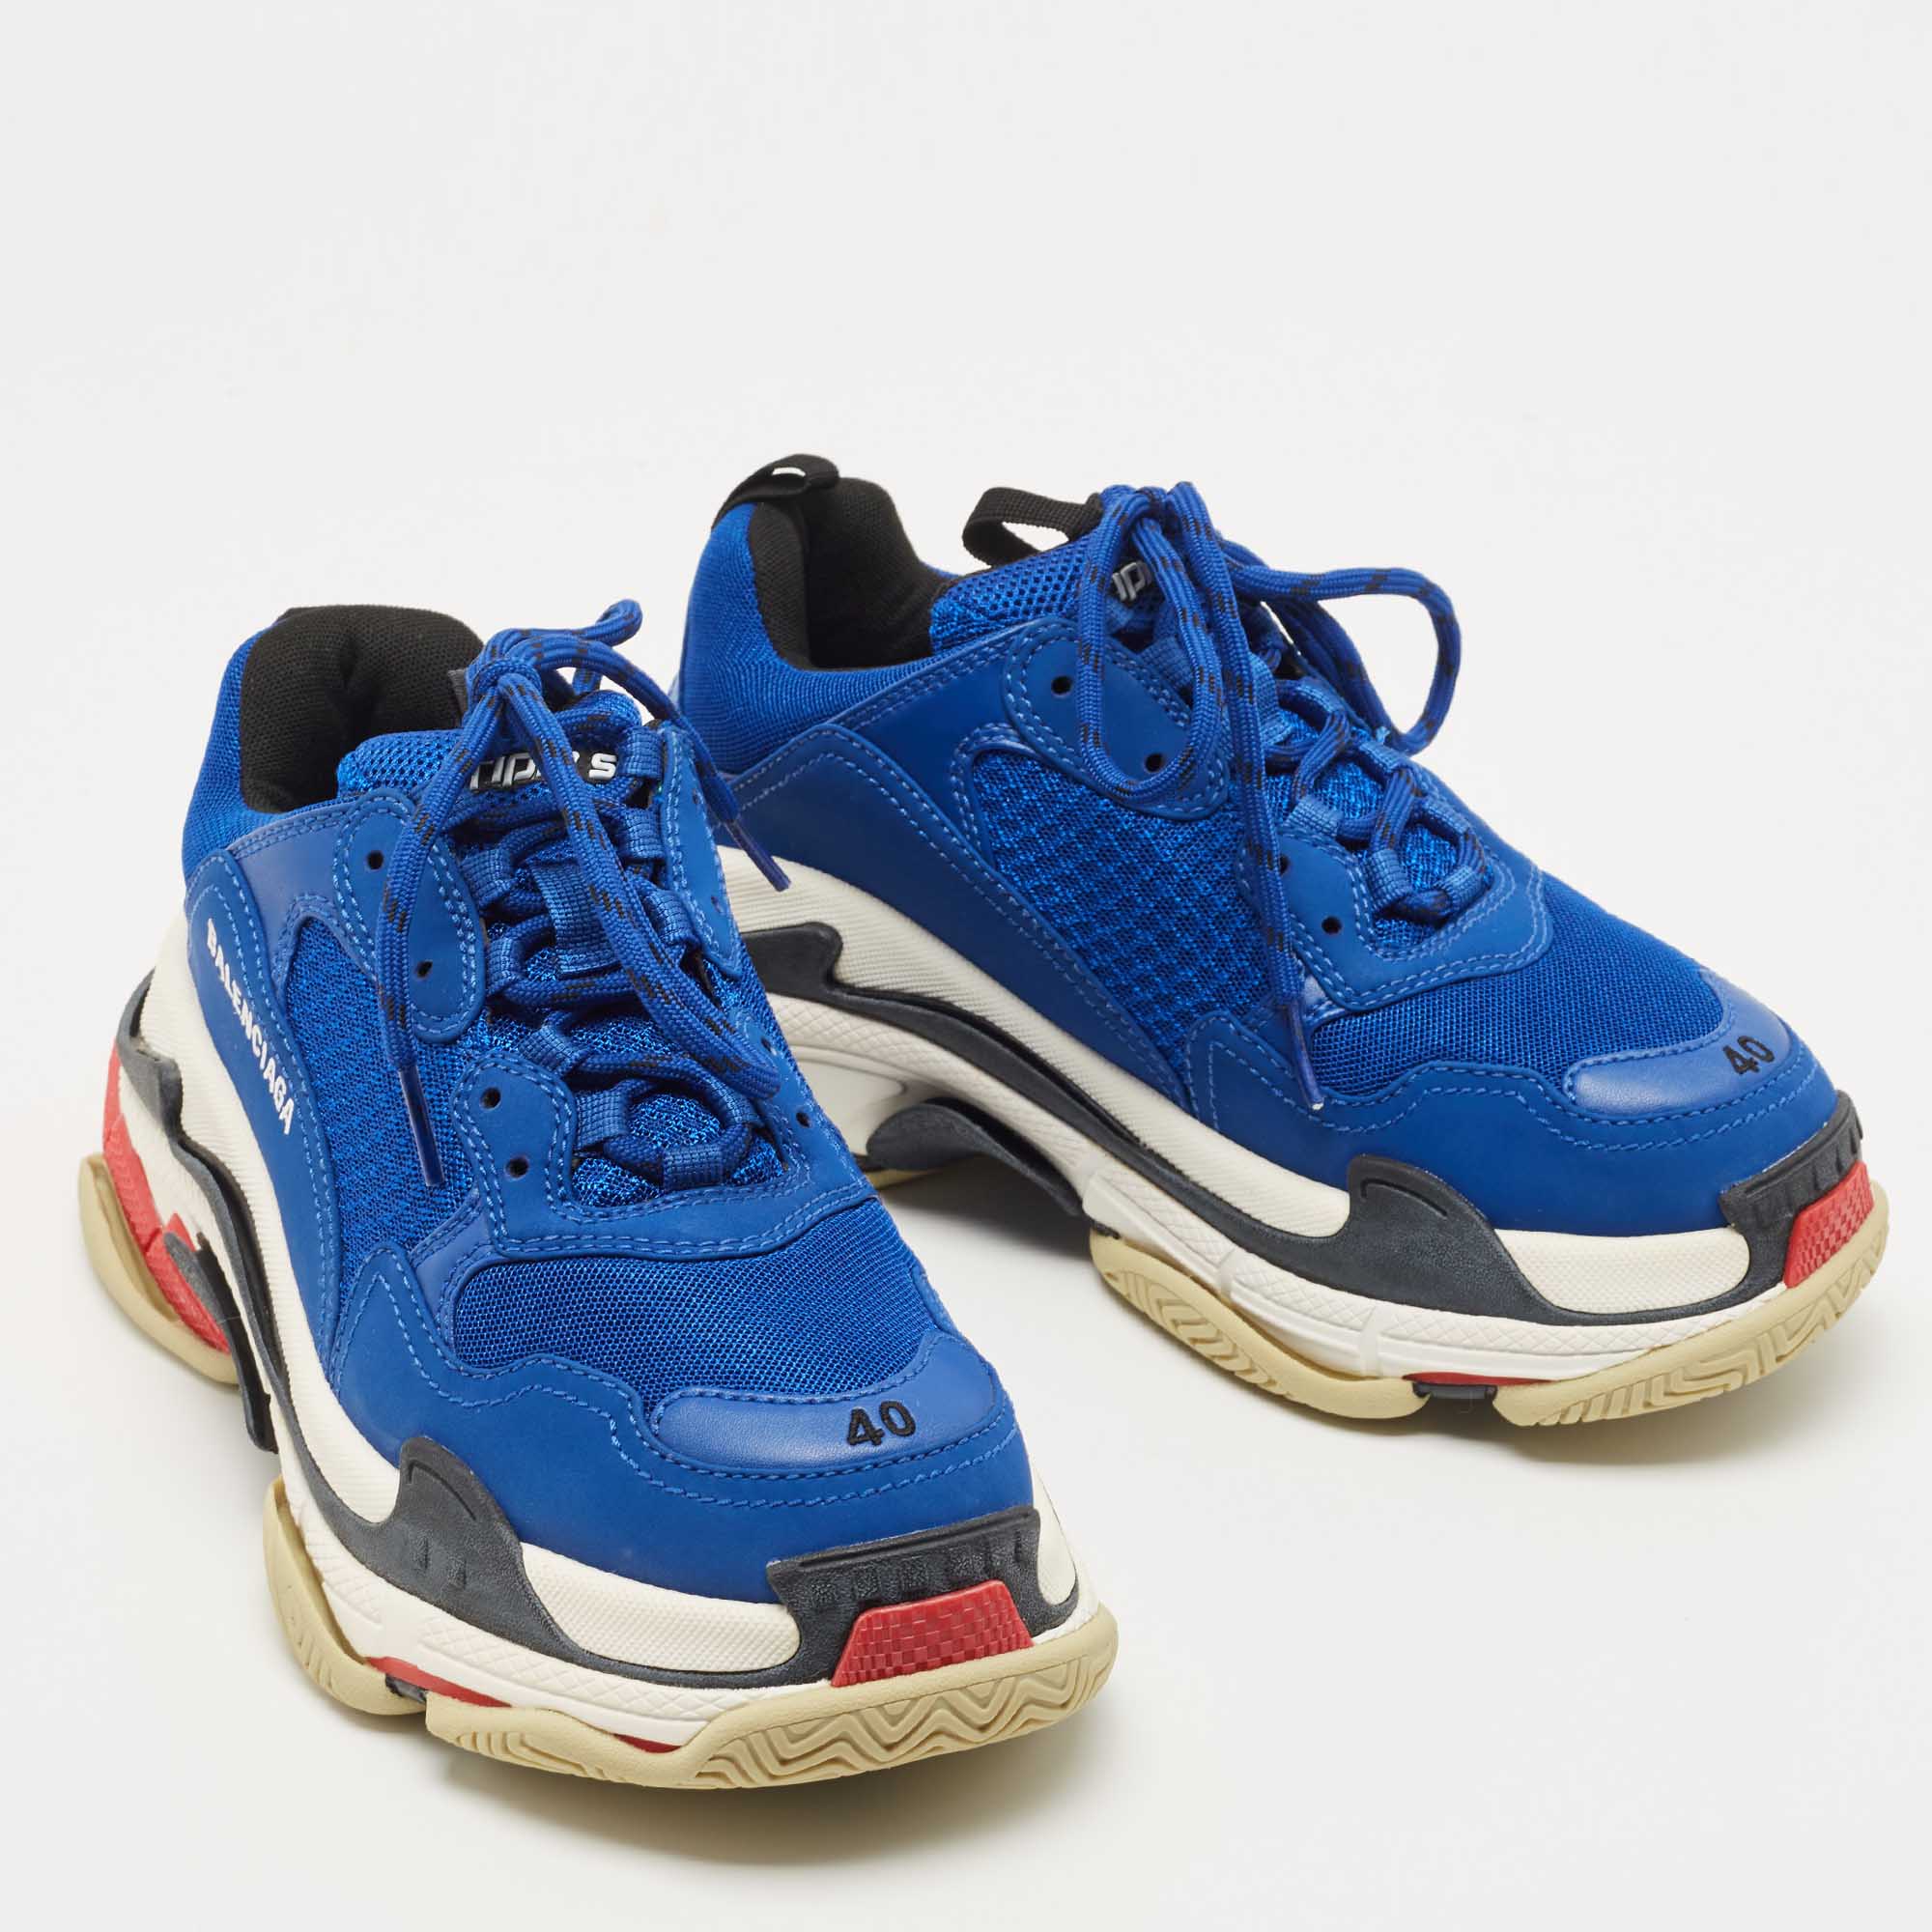 Balenciaga Blue Mesh And Leather Triple S Sneakers Size 40